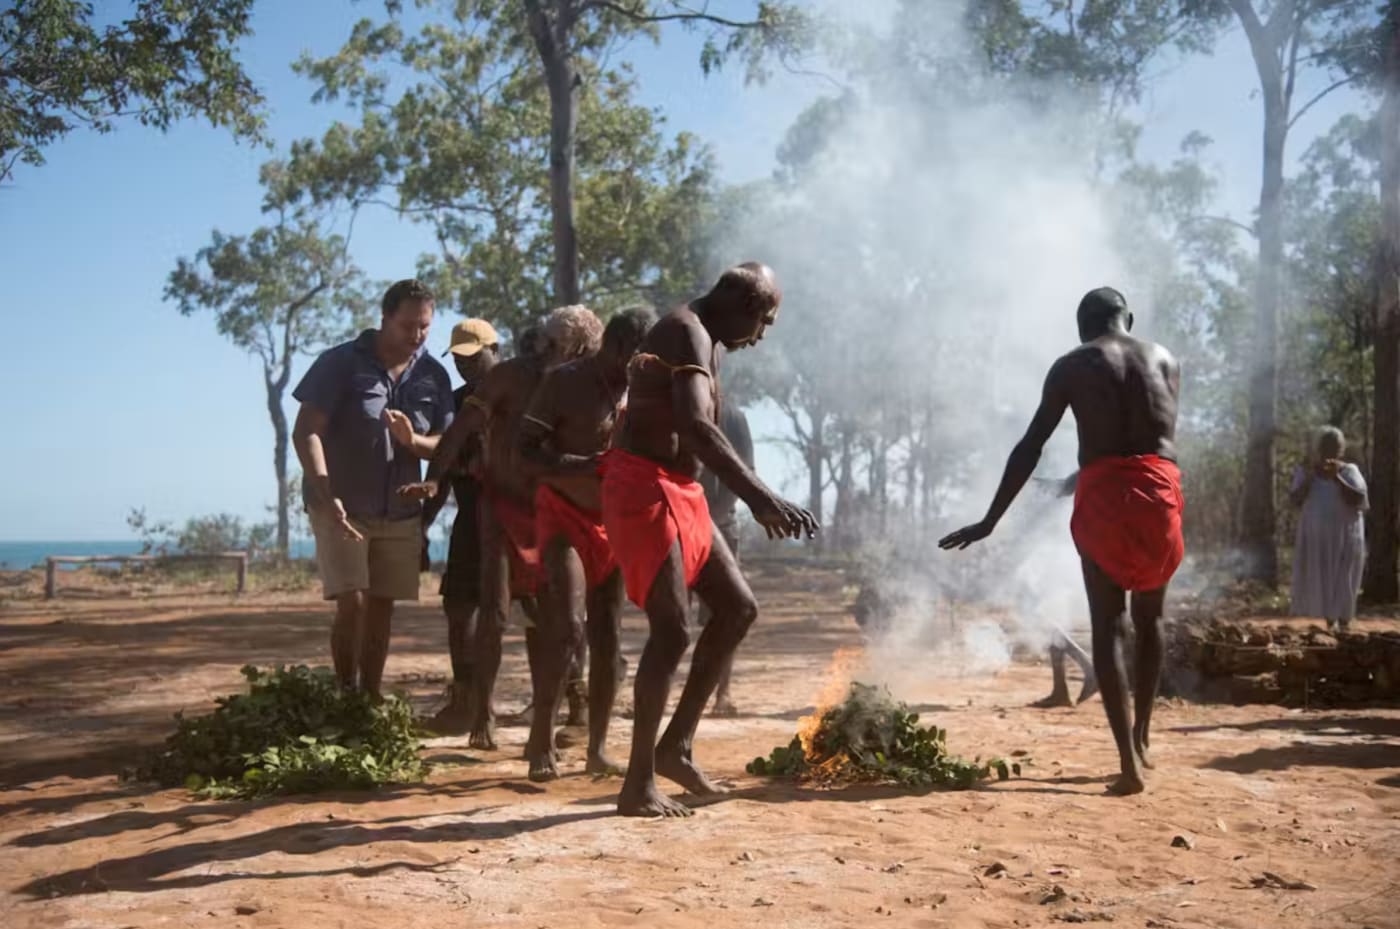 Munupi people perform a traditional dance at Pitjamirra on Melville Island, part of the Tiwi Islands off the Northern Territory.